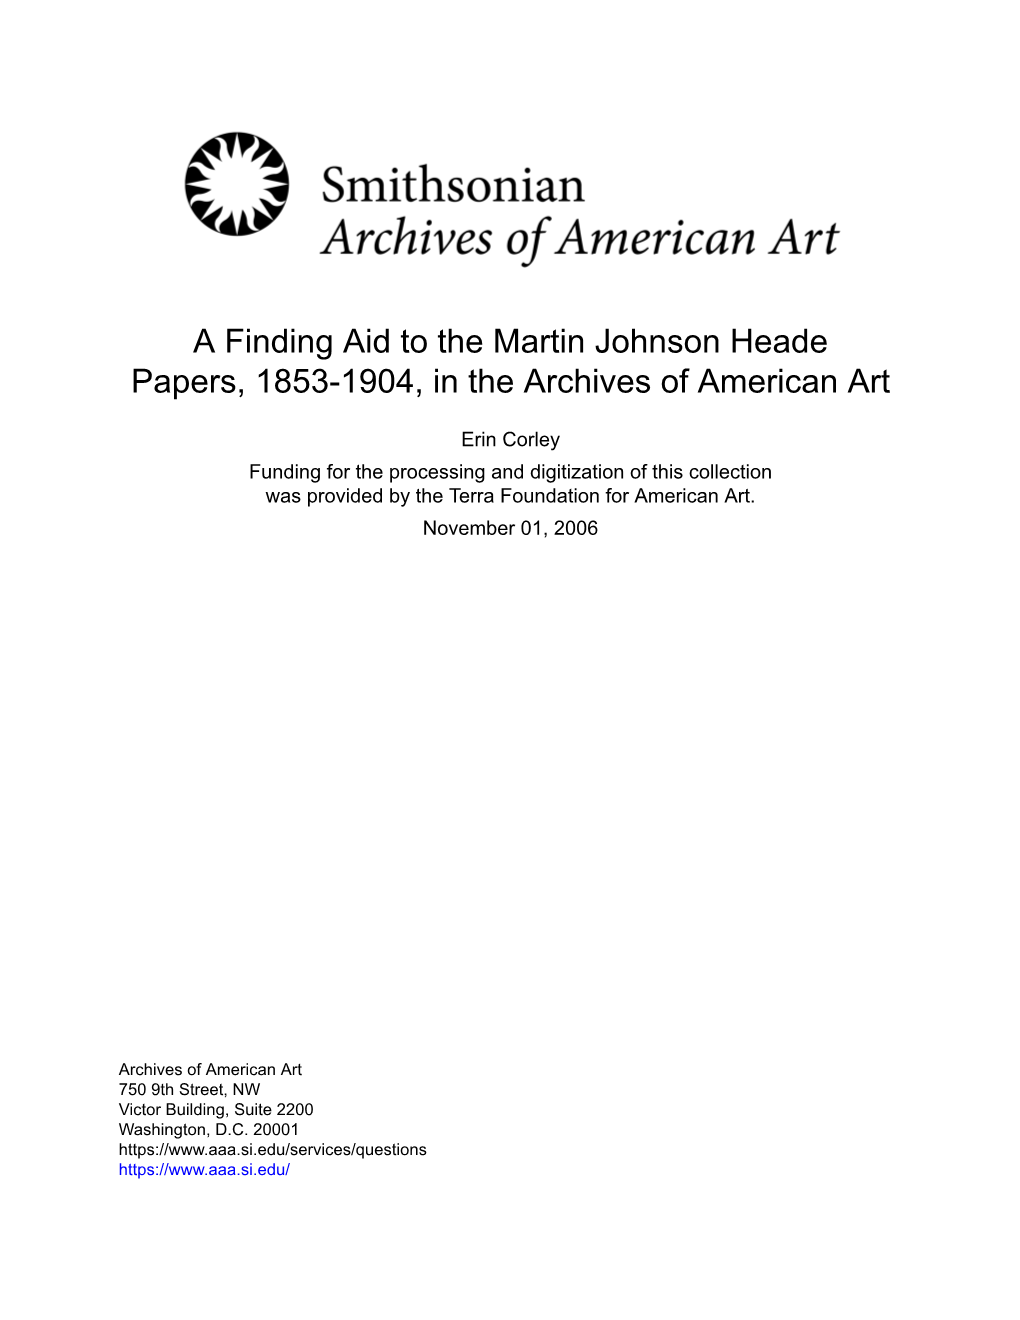 A Finding Aid to the Martin Johnson Heade Papers, 1853-1904, in the Archives of American Art